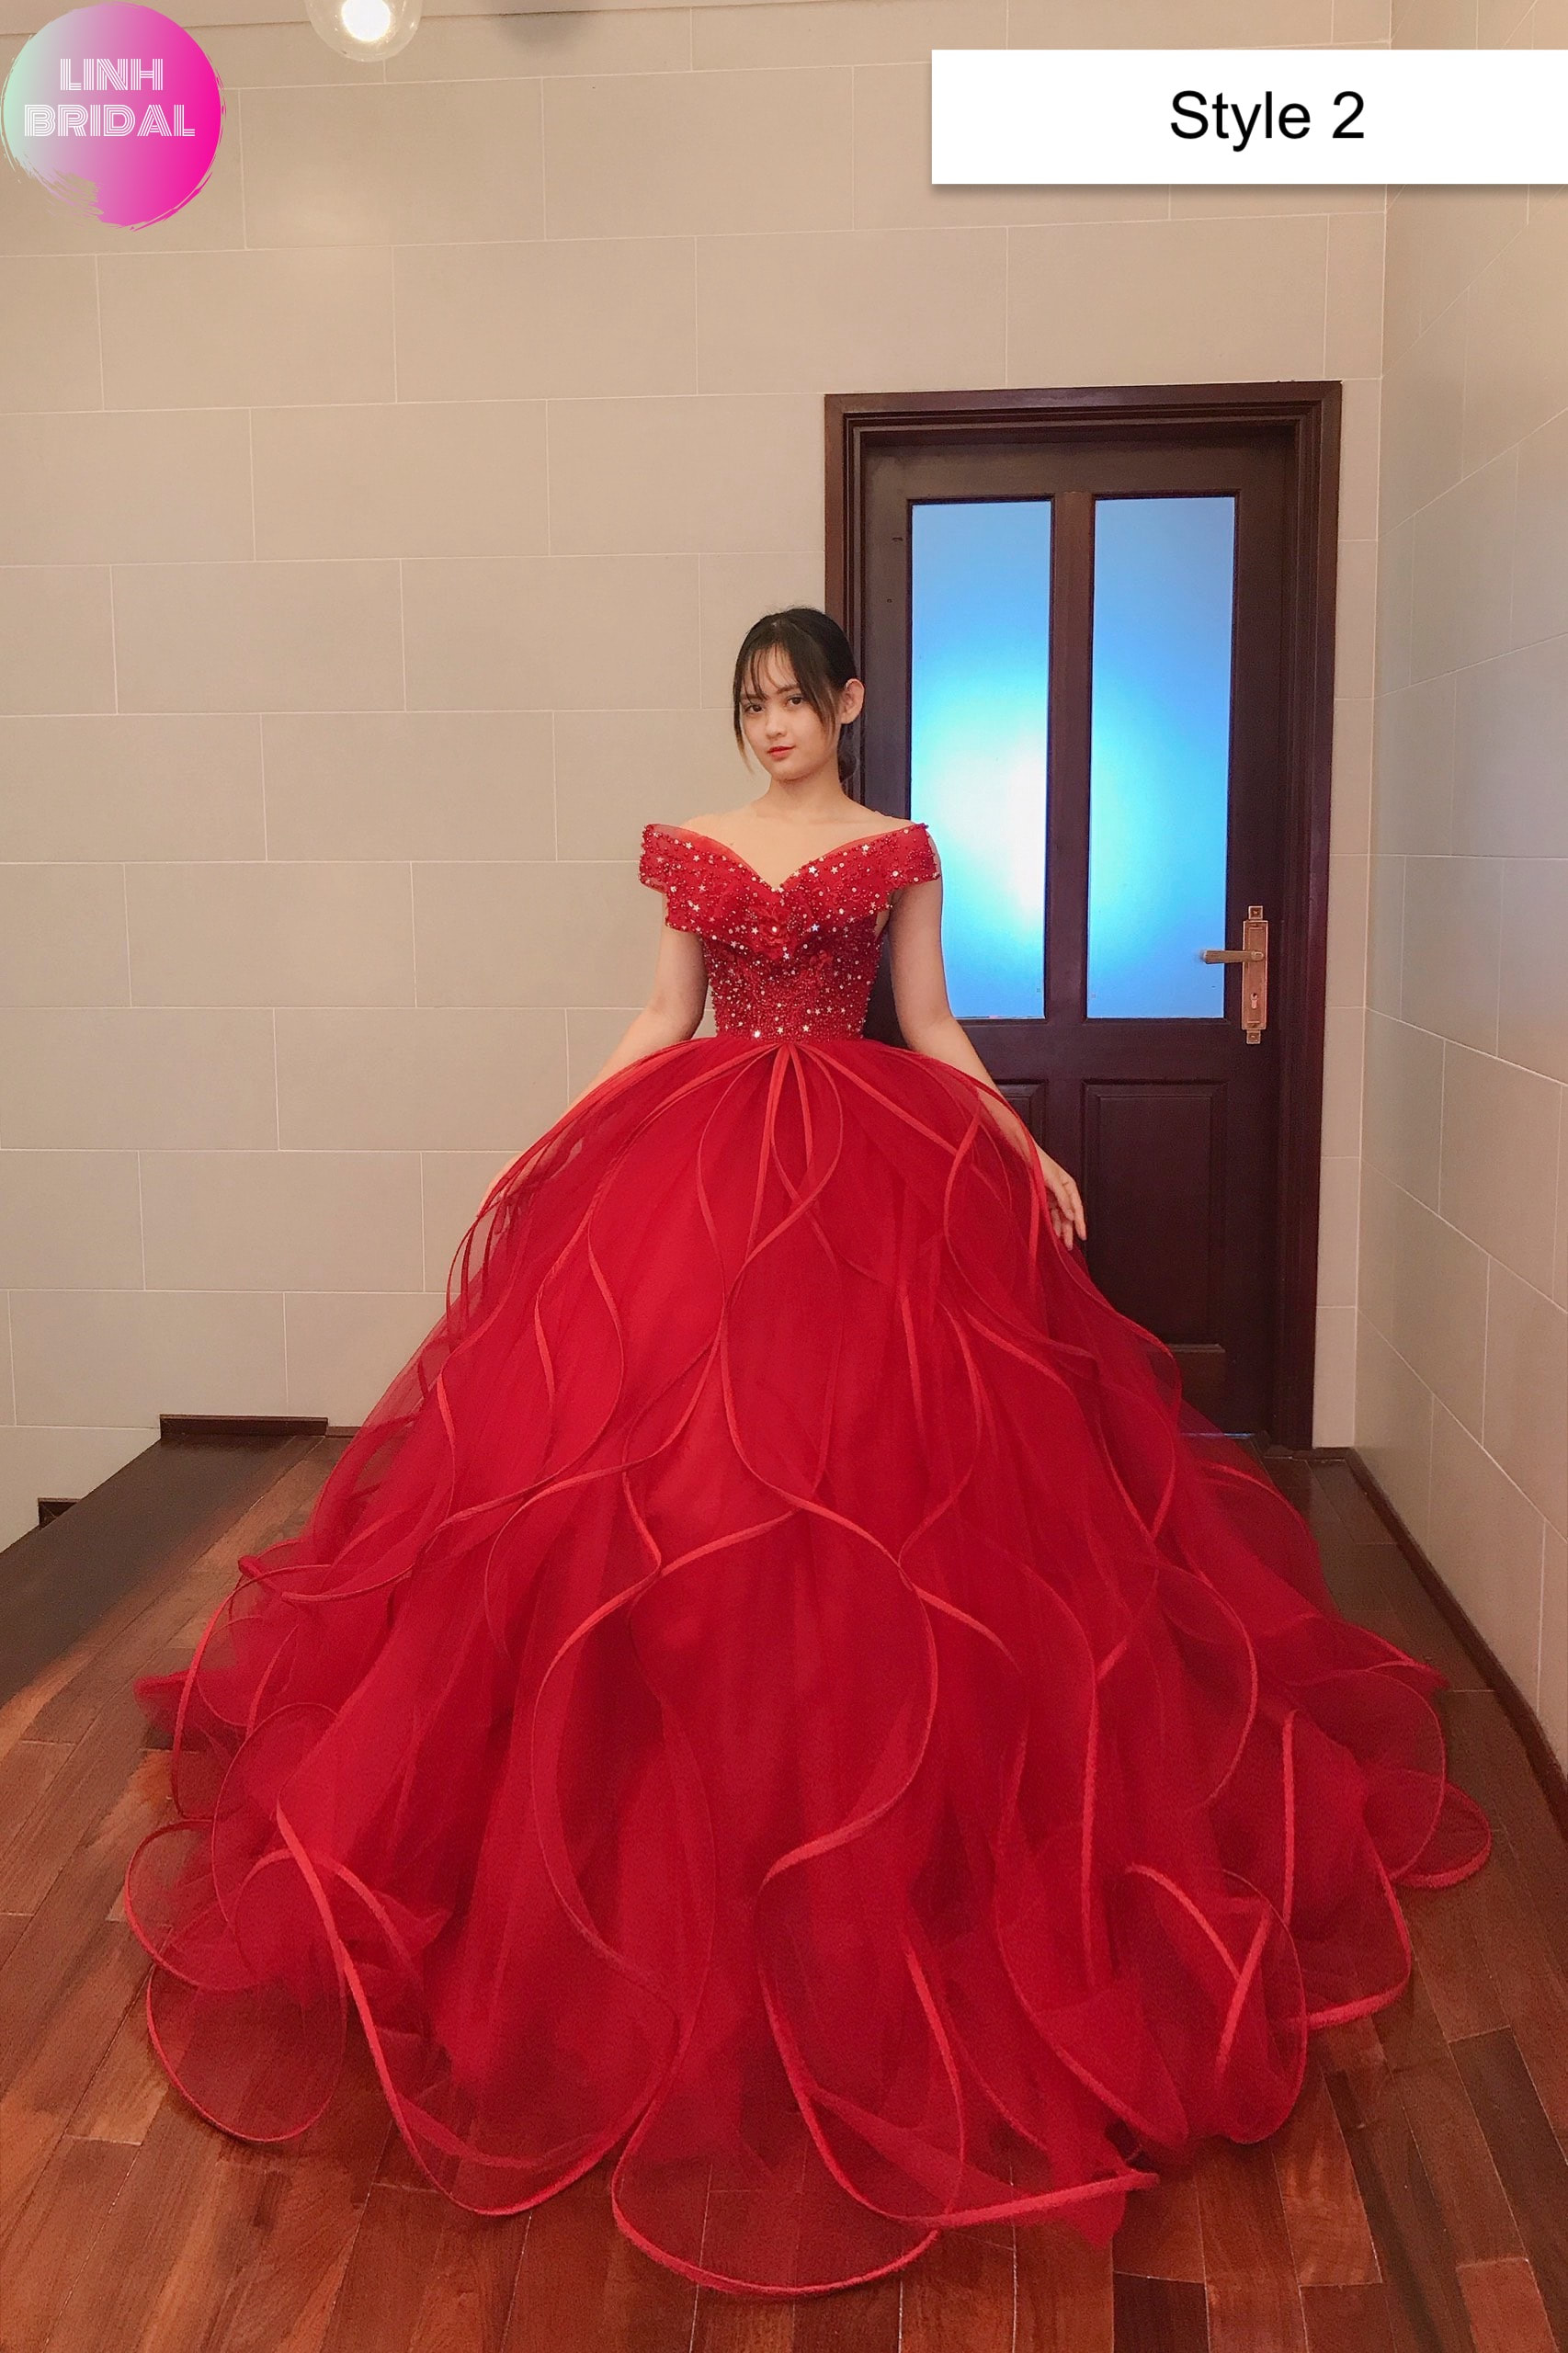 Flounce red princess tulle ball gown ...